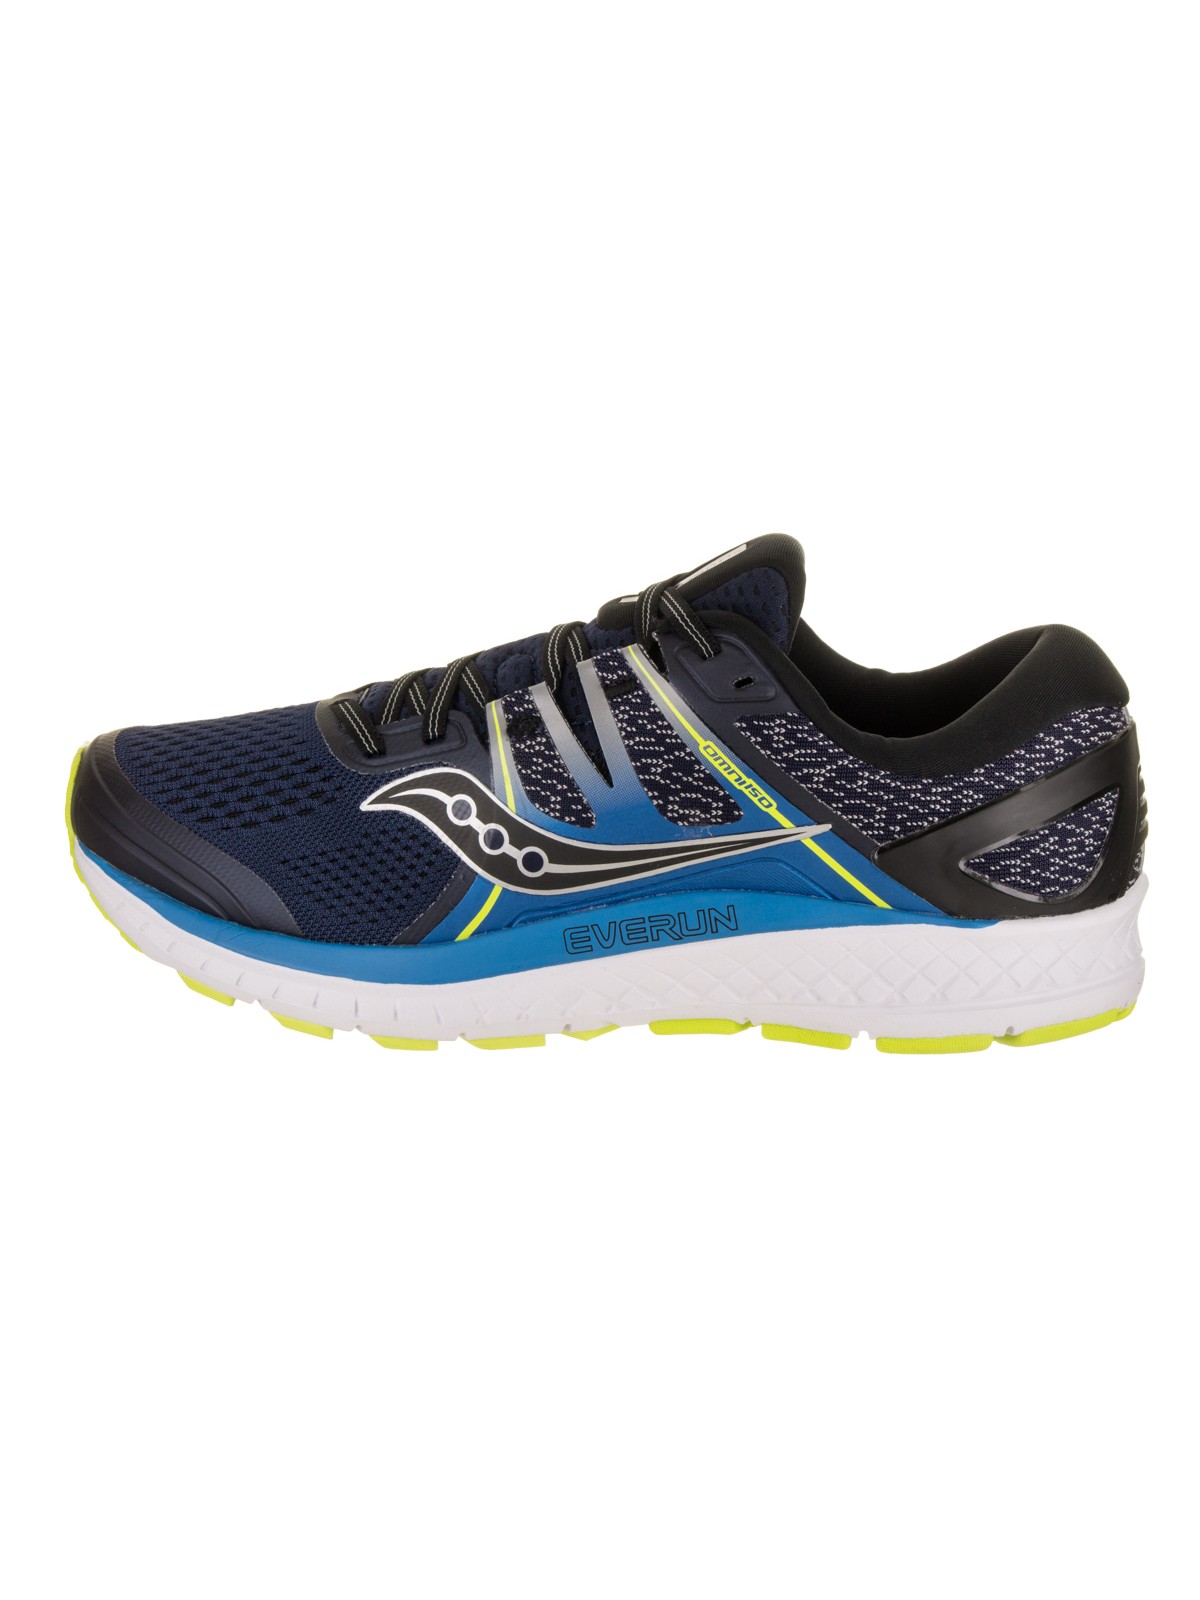 Saucony Mens Omni ISO Road Running Shoe Sneaker - Navy/Blue/Citron - Size 11.5 - image 3 of 5